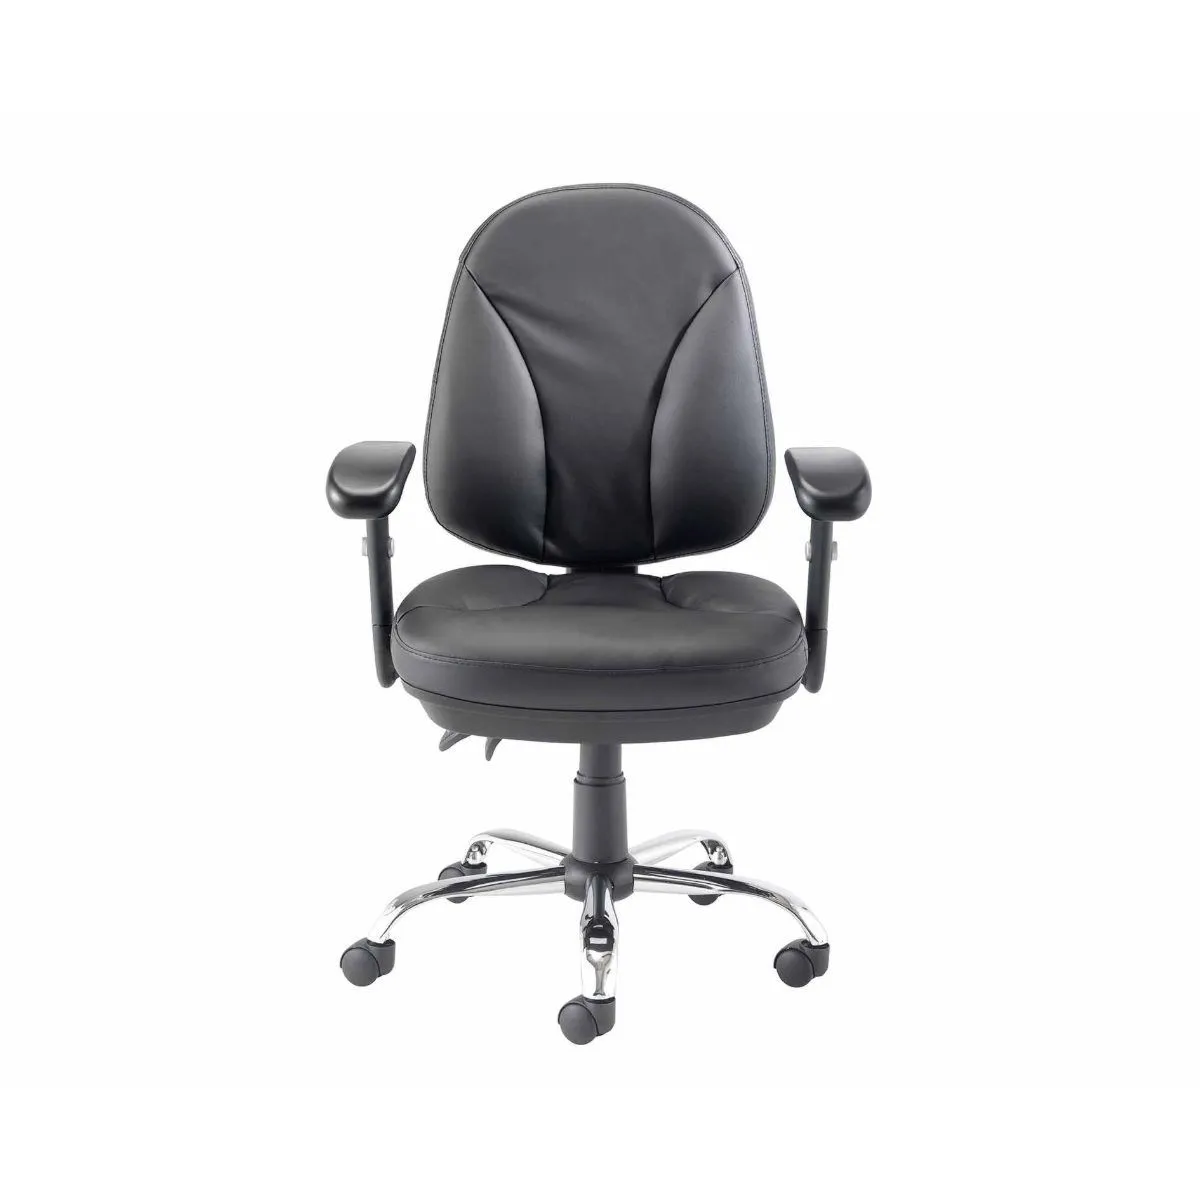 Puma Twin Lever Operators Chair Black Vinyl faux leather  Height Adjustable Arms asynchronous mechanism 